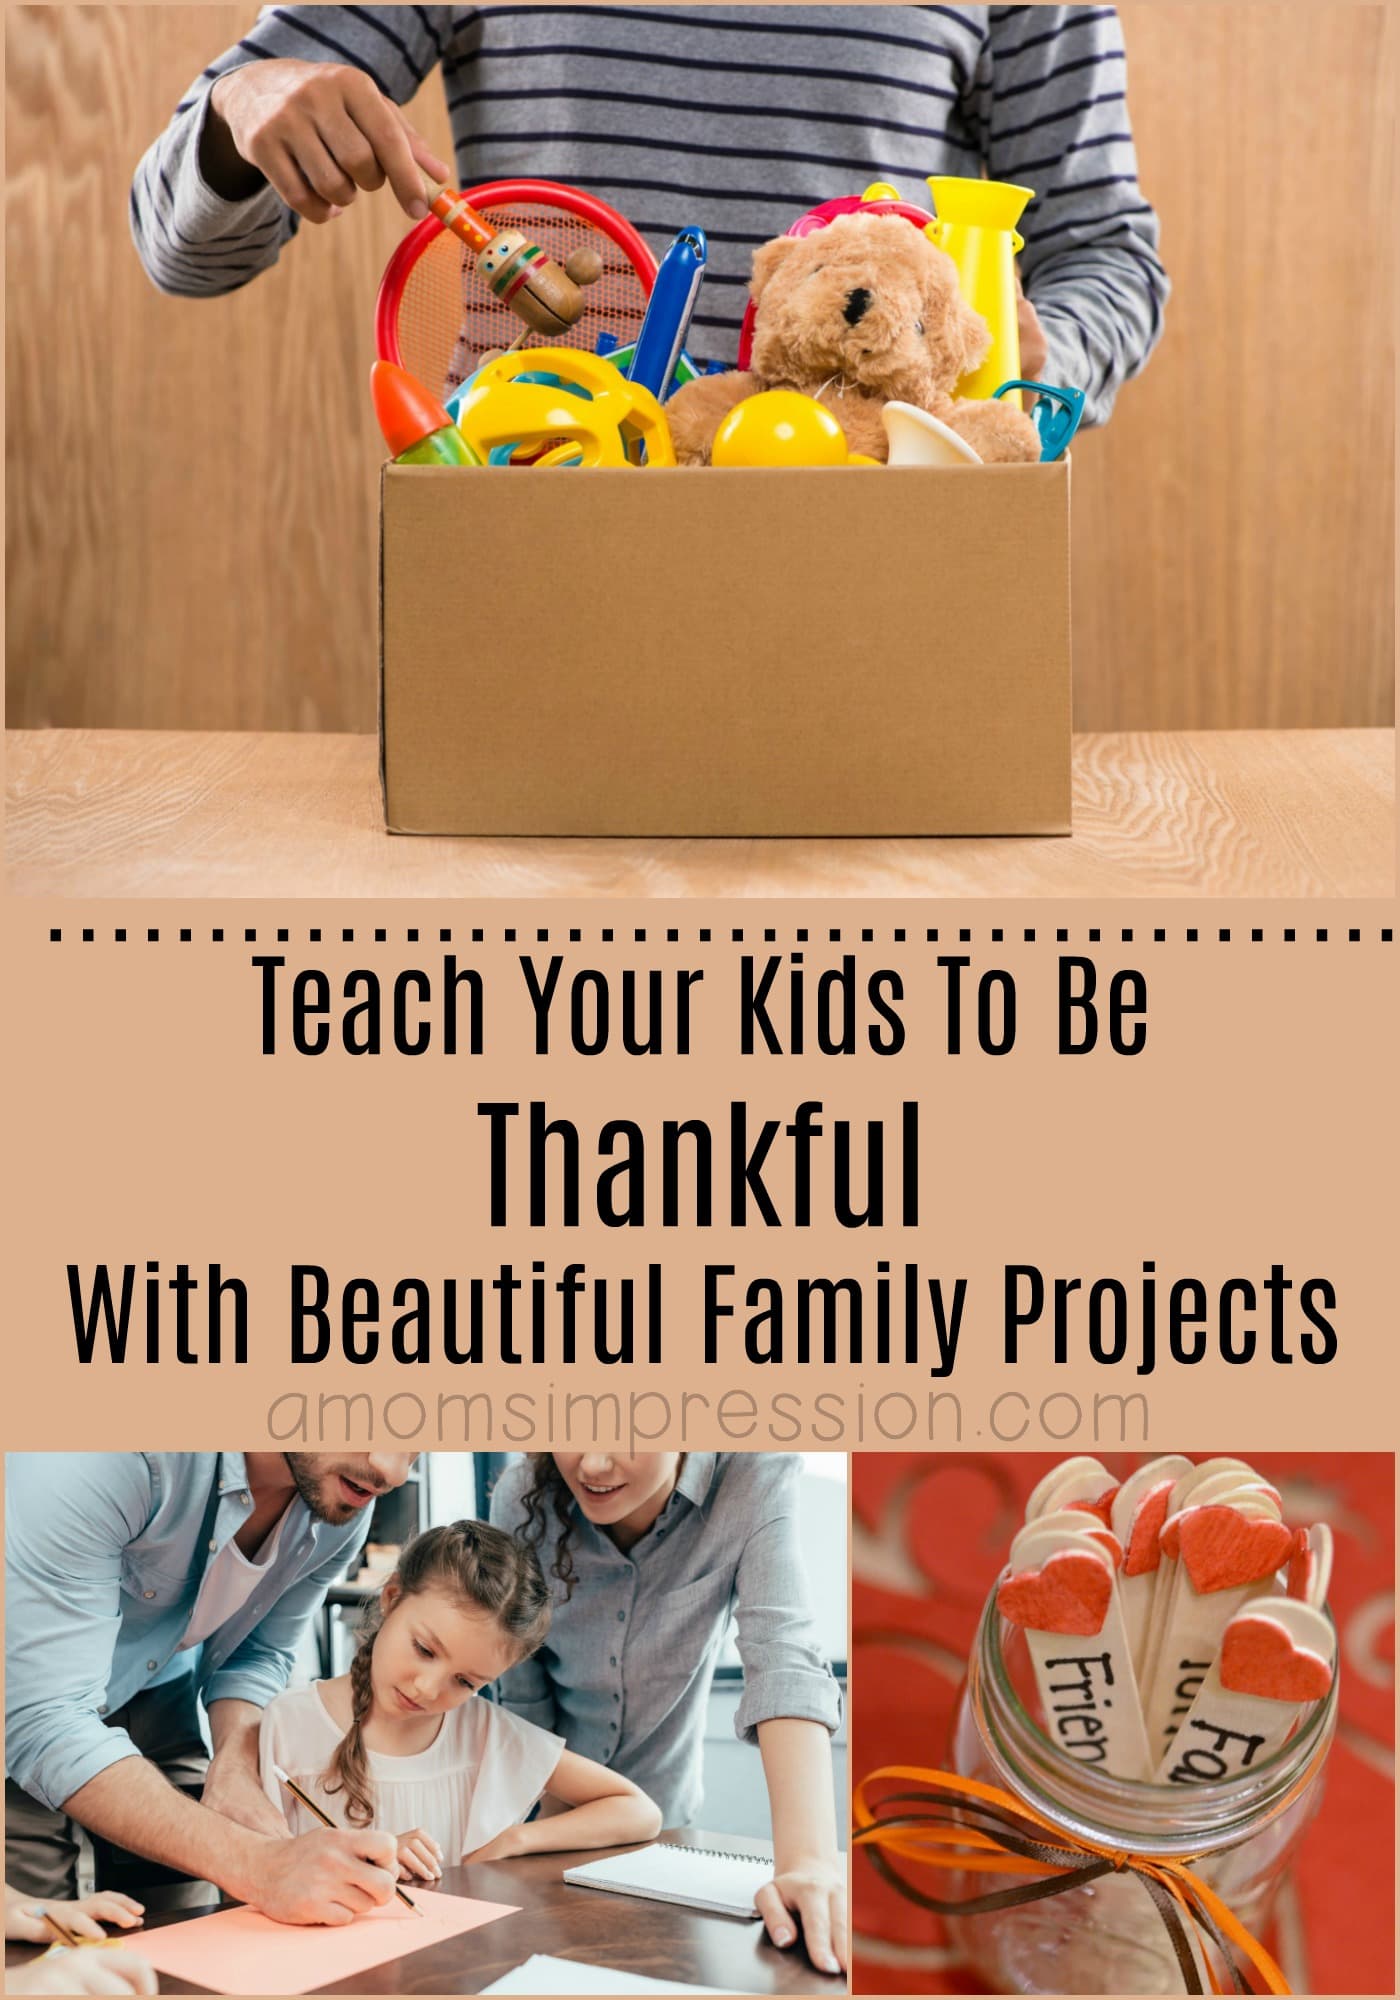 Teaching Kids to be Thankful With Beautiful Family Projects